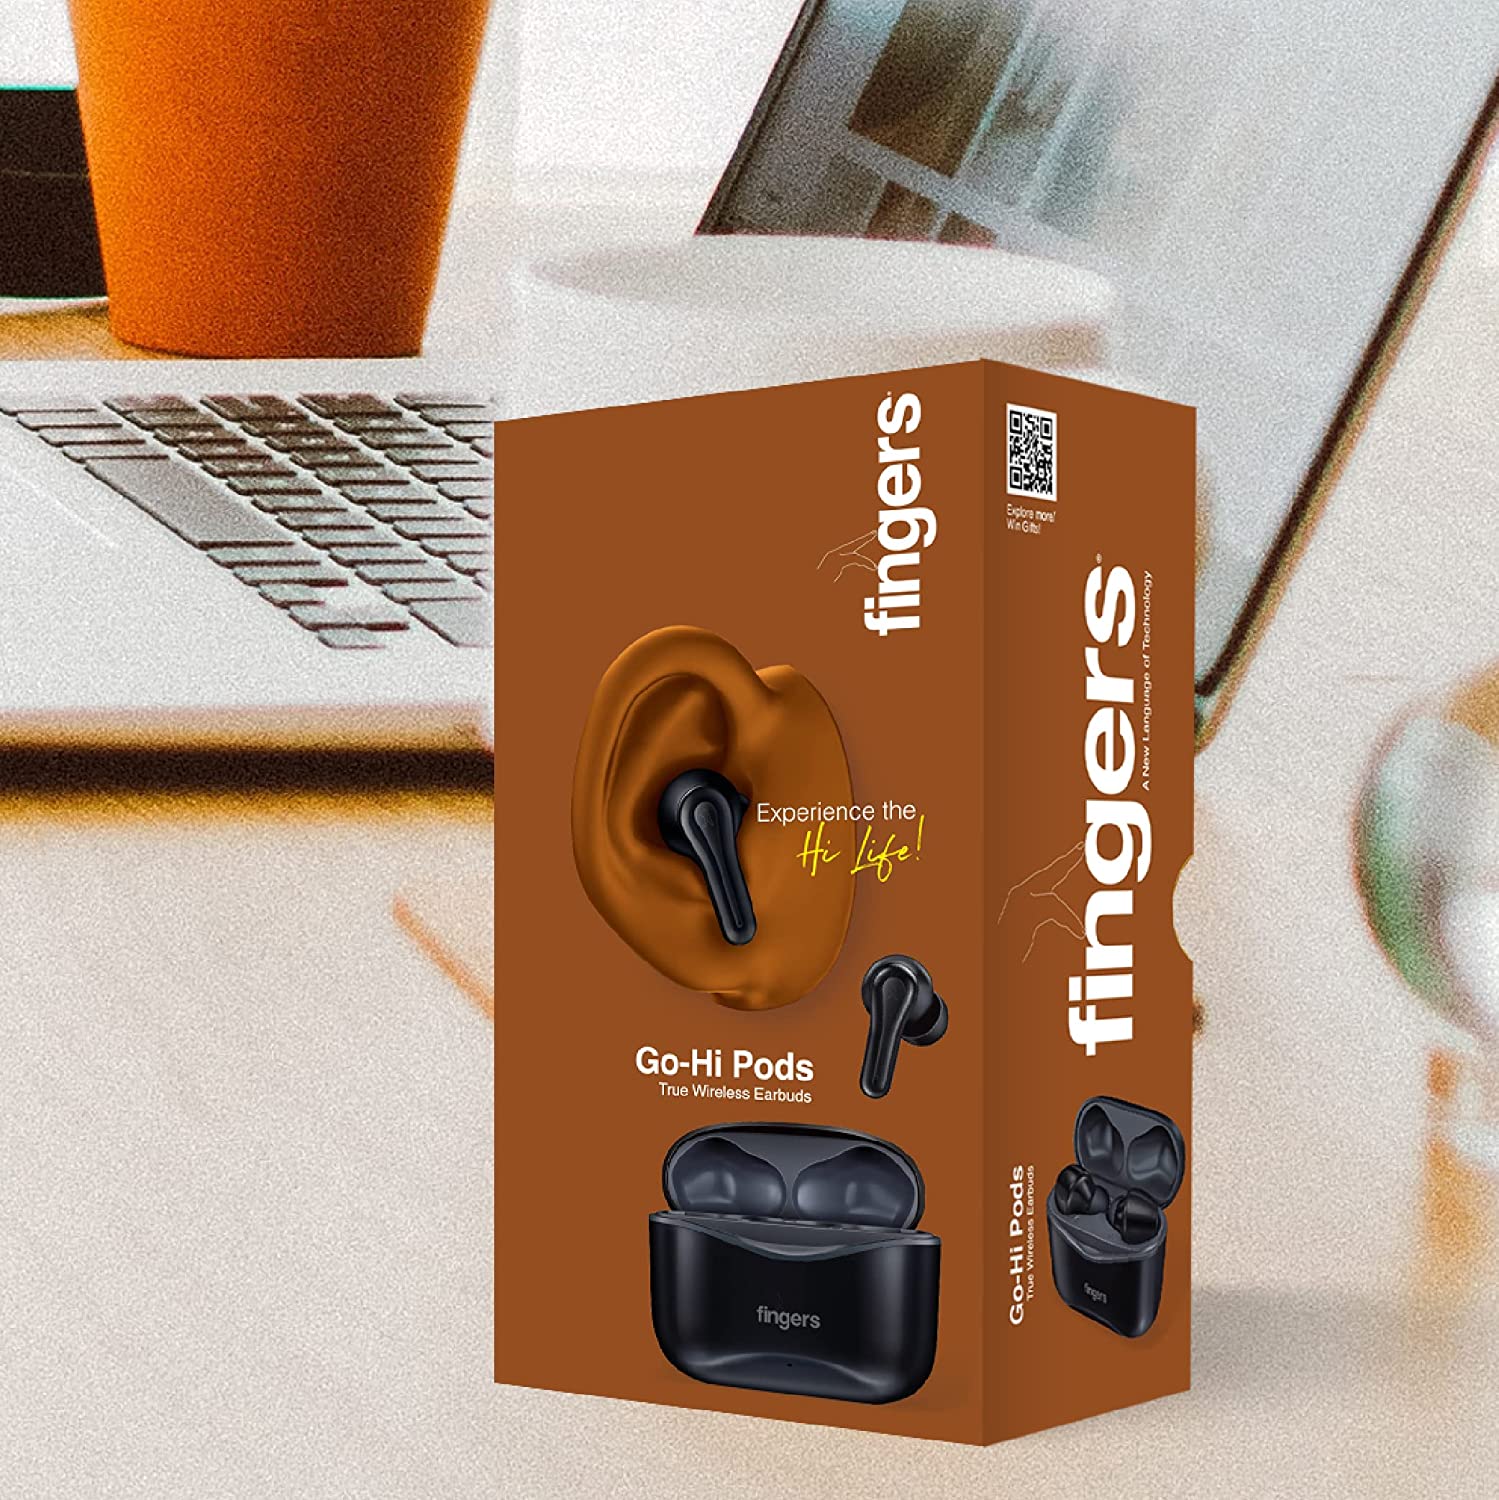 FINGERS Go-Hi Pods - True Wireless Earbuds (Incredible 28 Hours Playback, Hi-Speed Charging, Surround Noise Cancellation, Smart Touch Controls, Sweat Resistant)-Earbuds-dealsplant